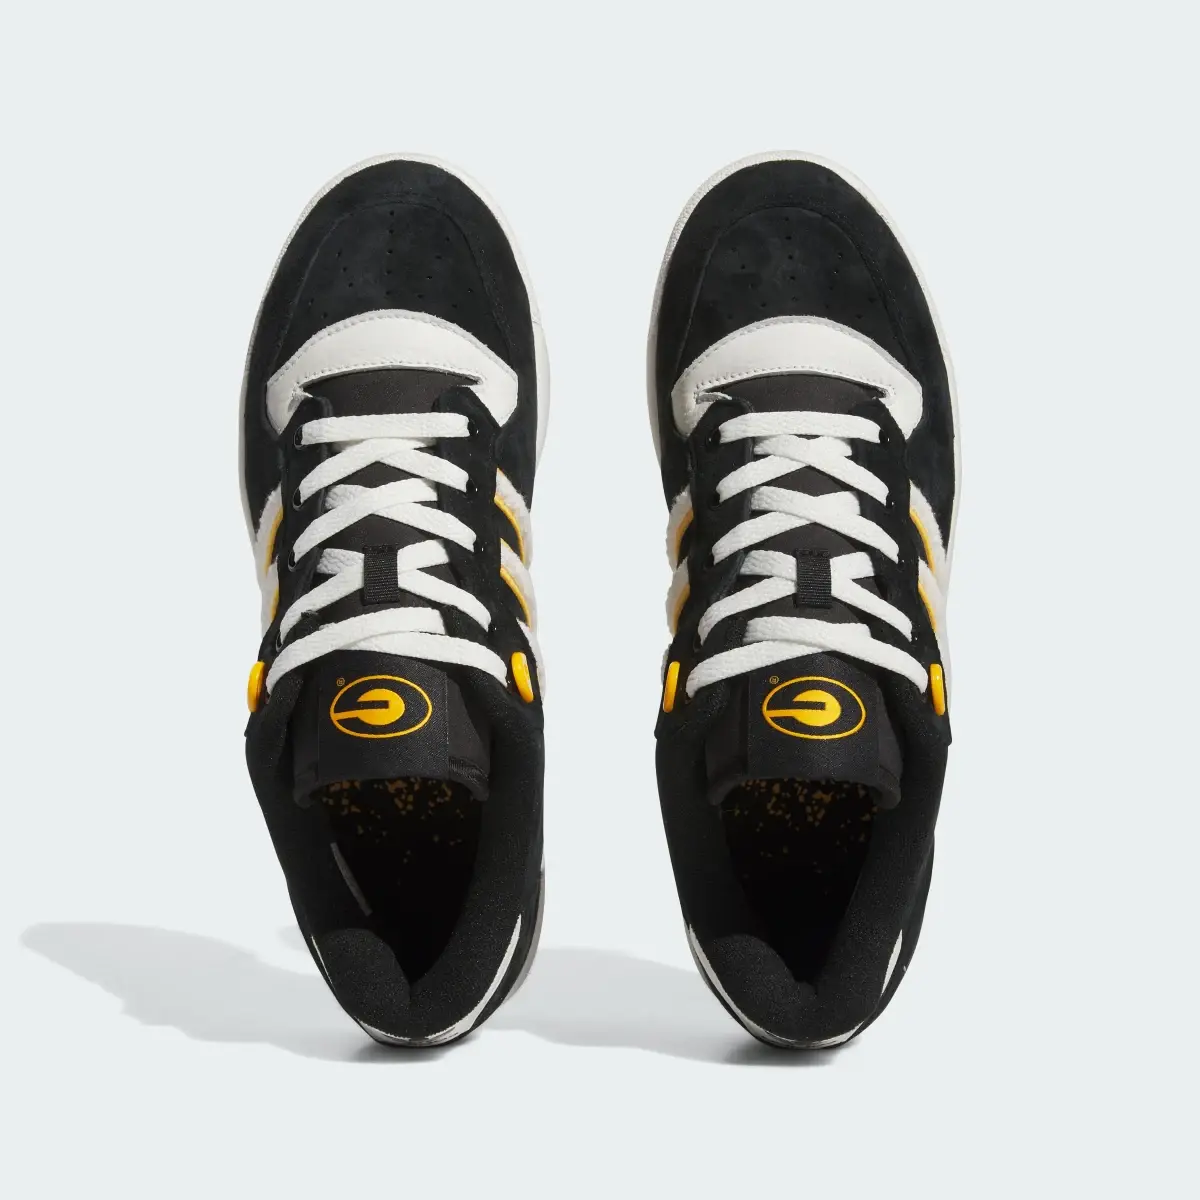 Adidas Grambling State Rivalry Low Shoes. 3